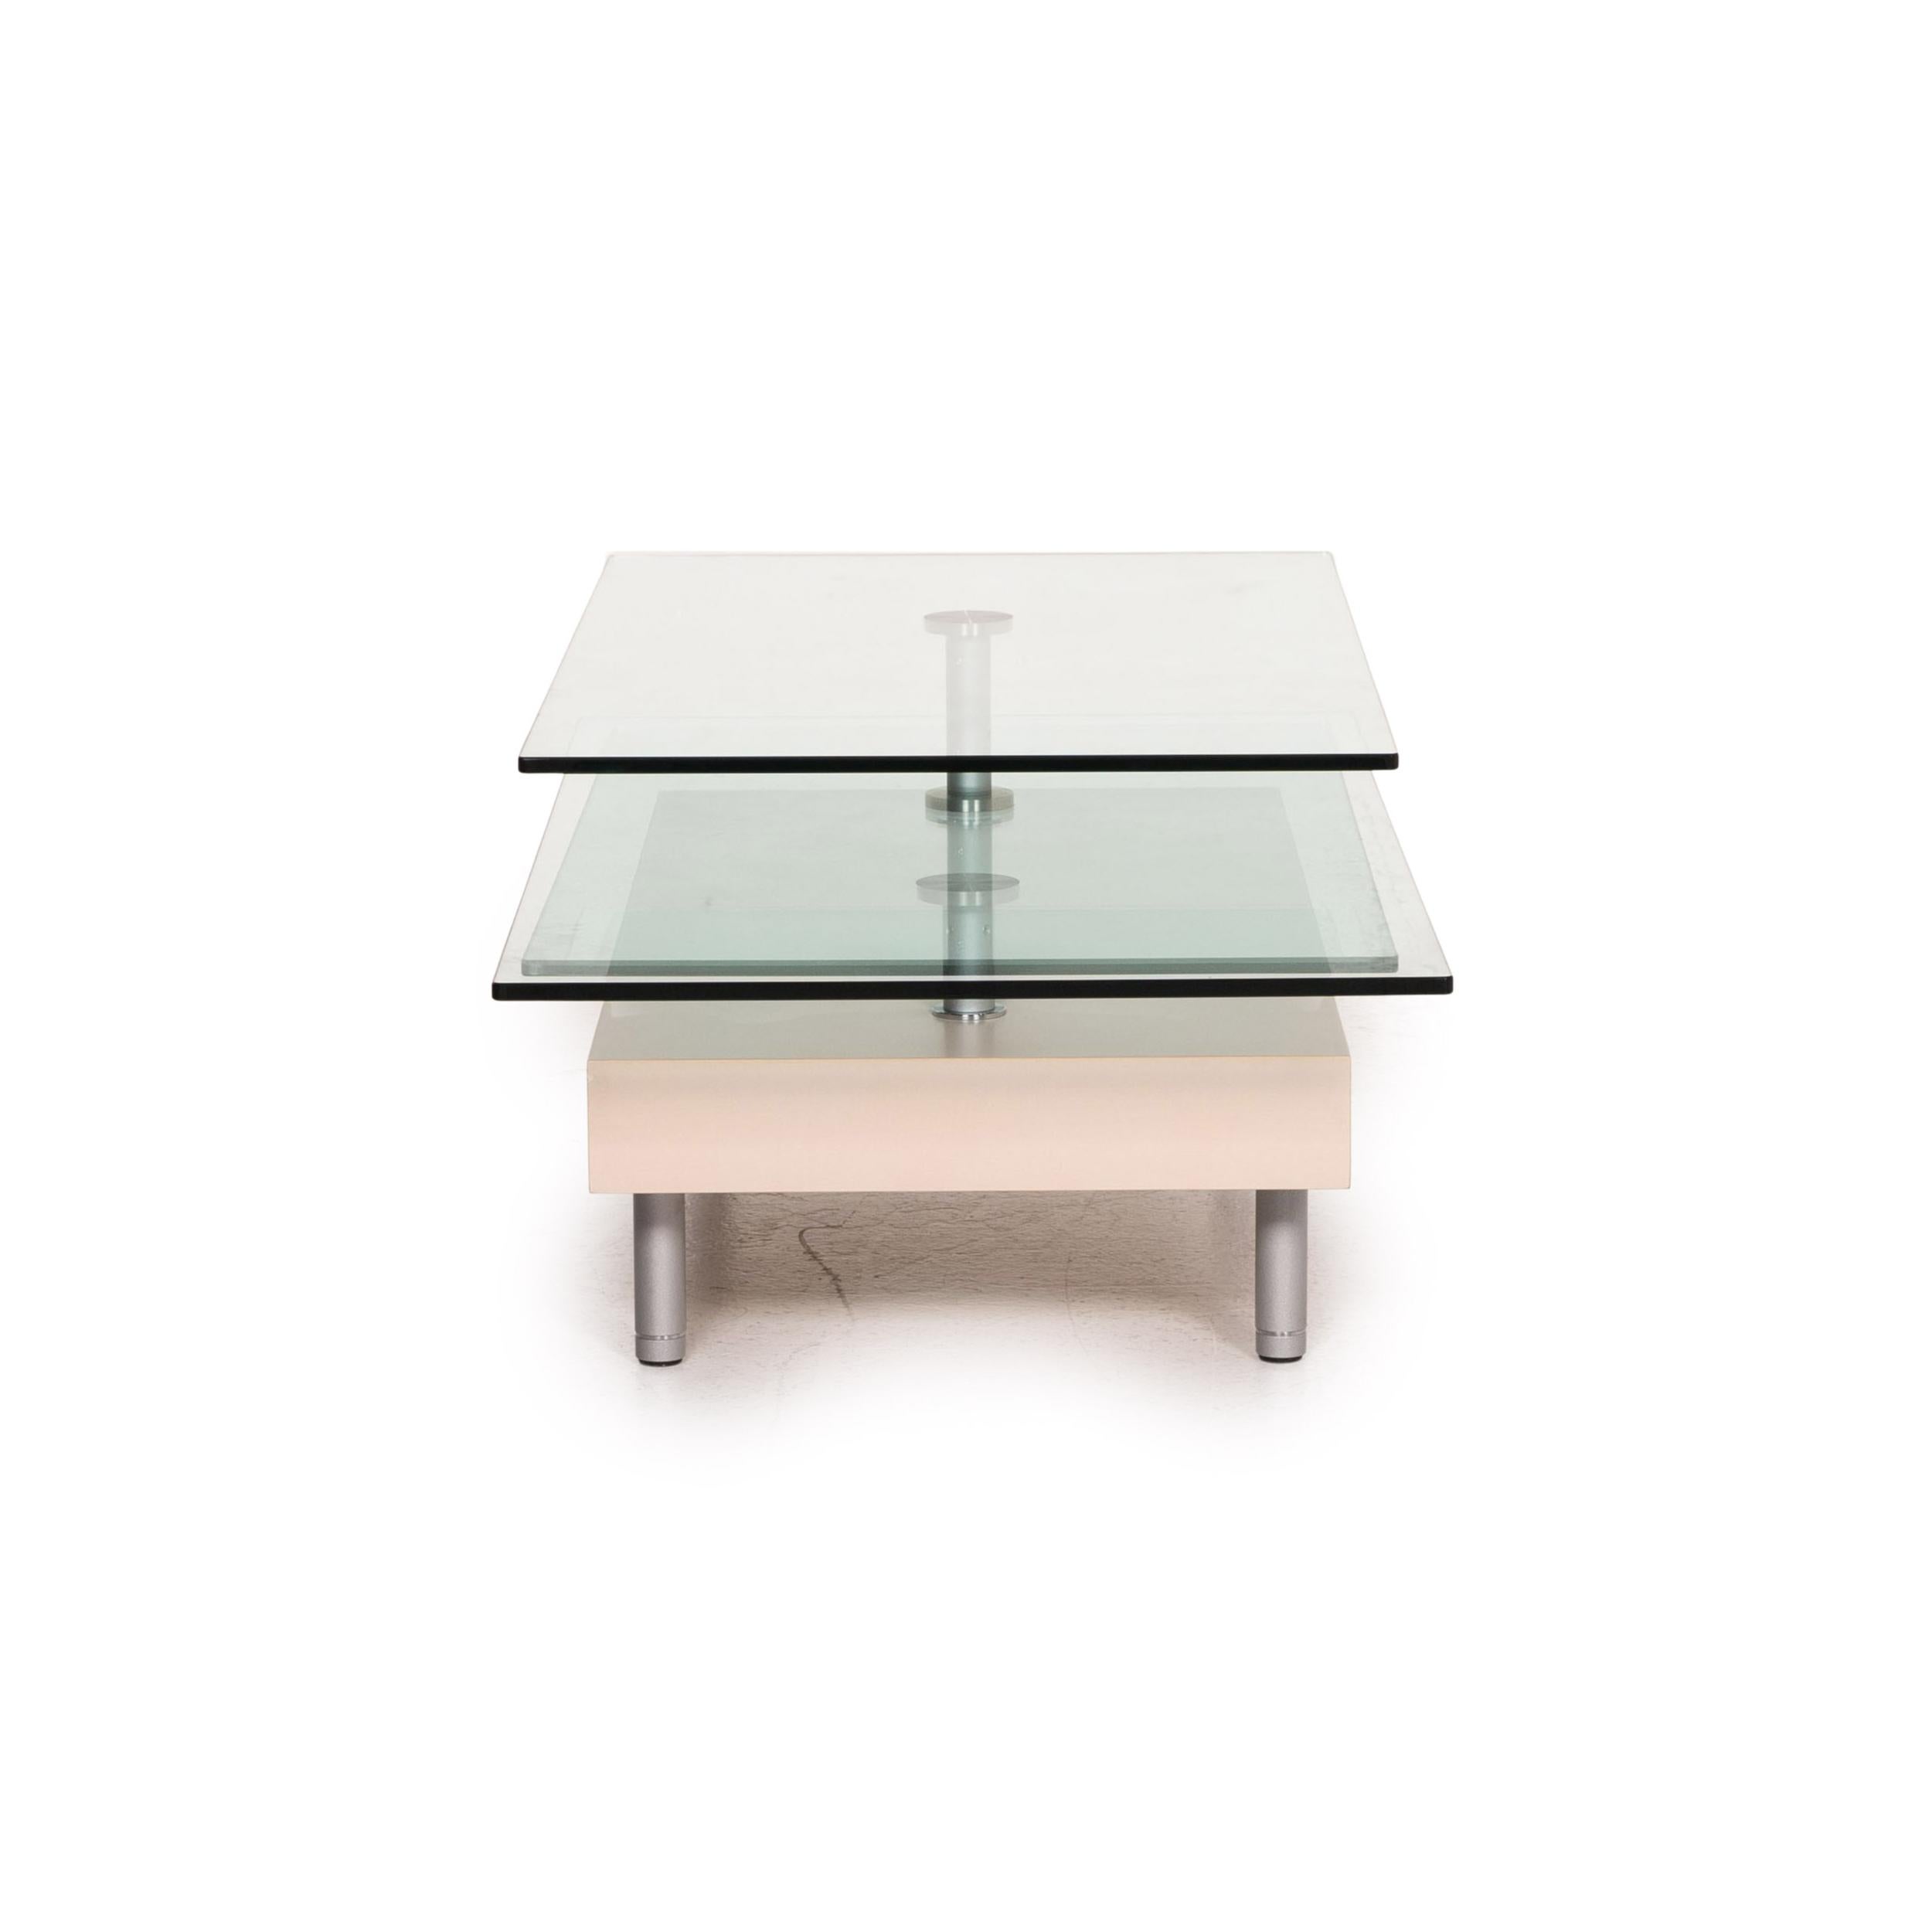 Rolf Benz Glass Coffee Table Beige Function 4